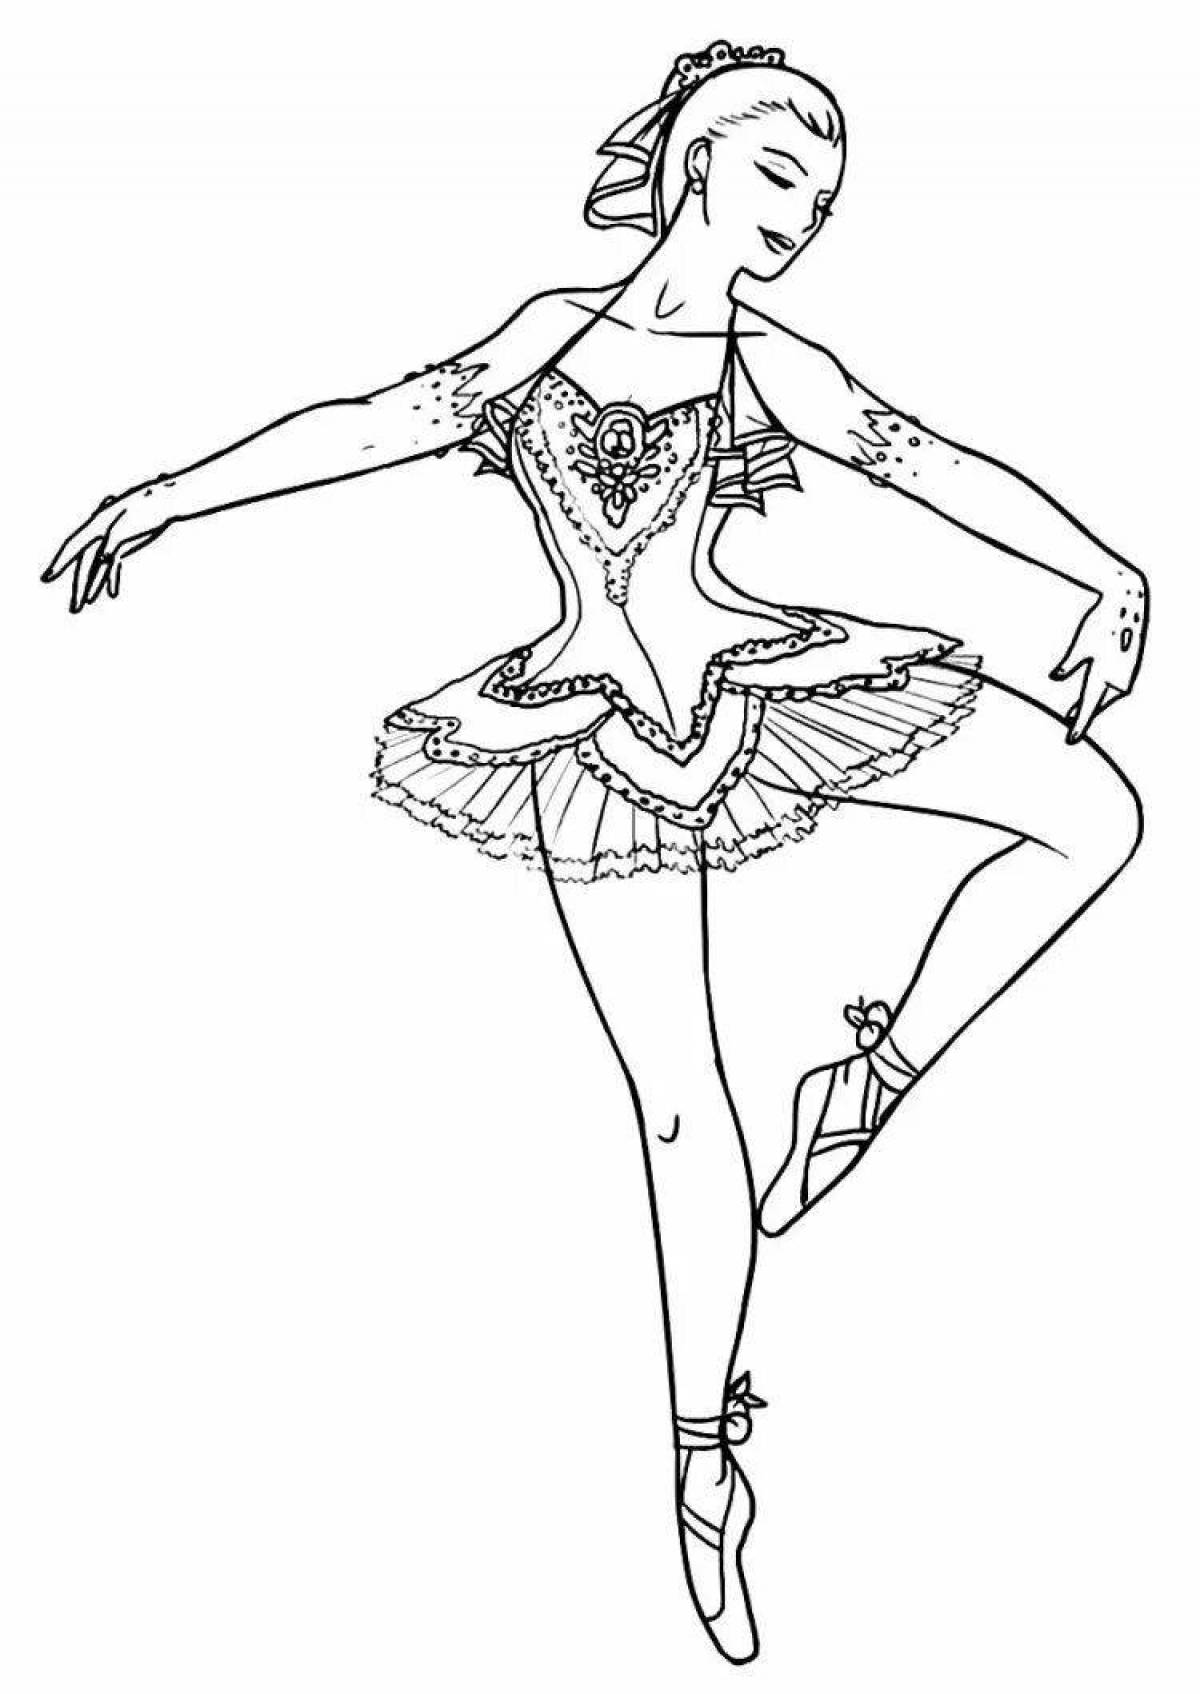 Coloring page sports dancer